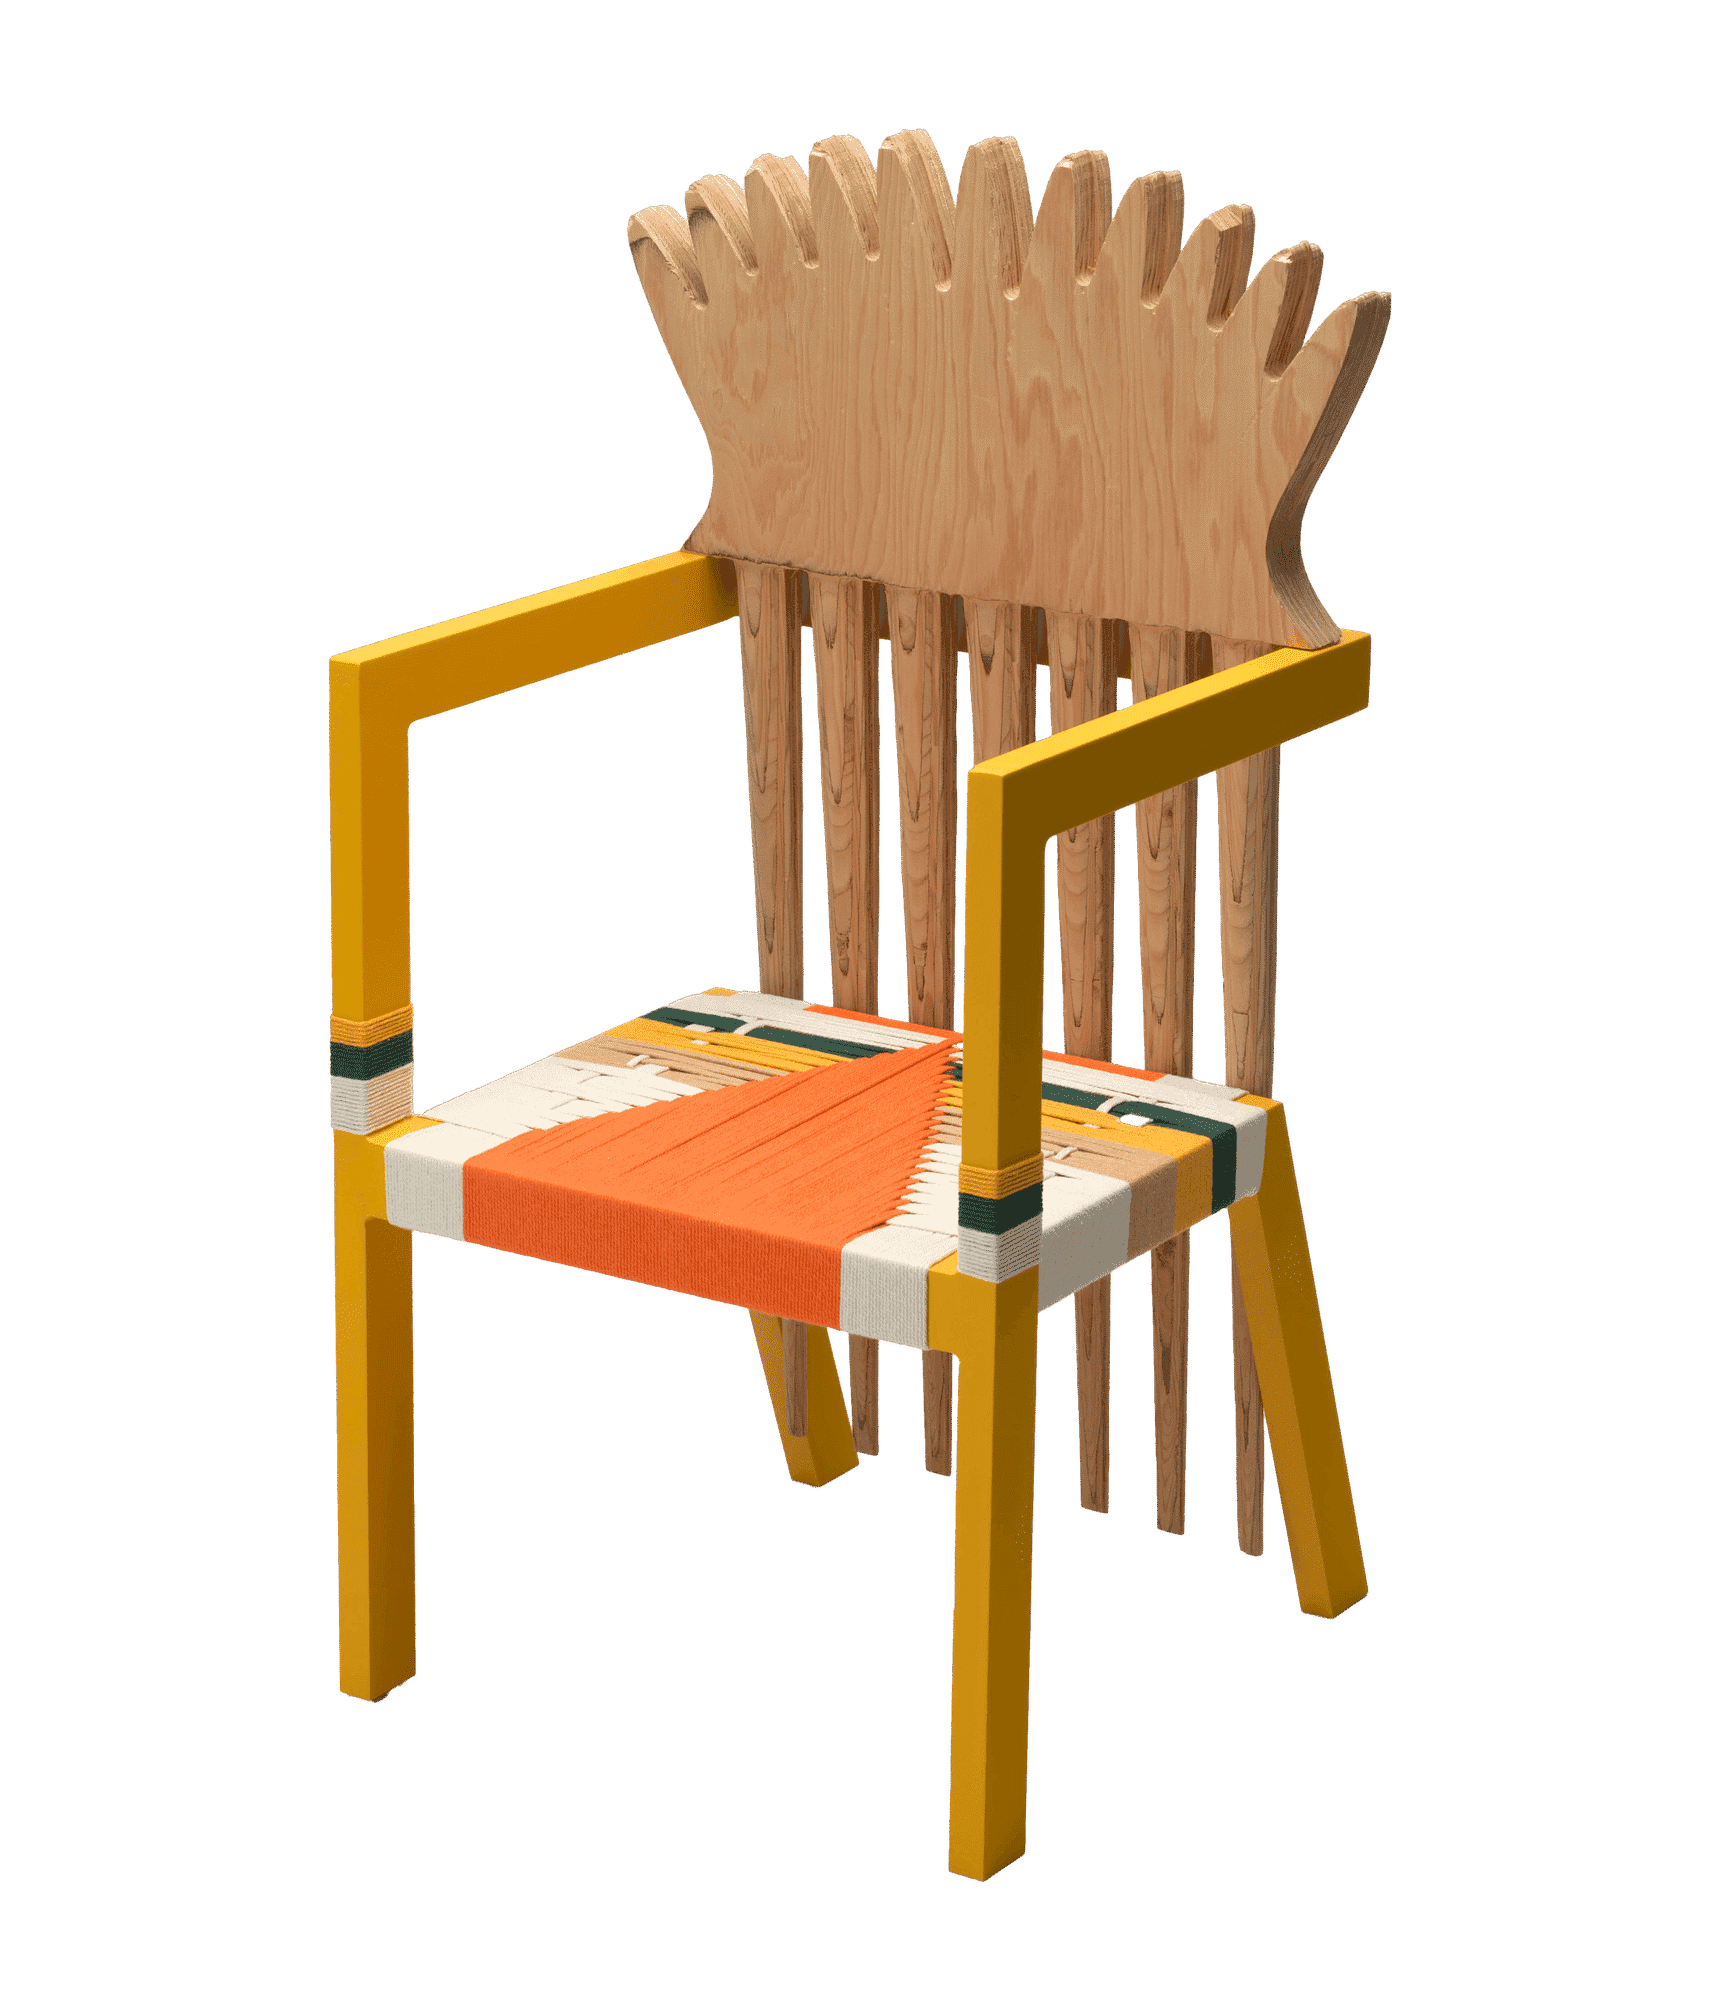 Wooden porch chair with chairback that looks like an Afro pick but with a crown like top